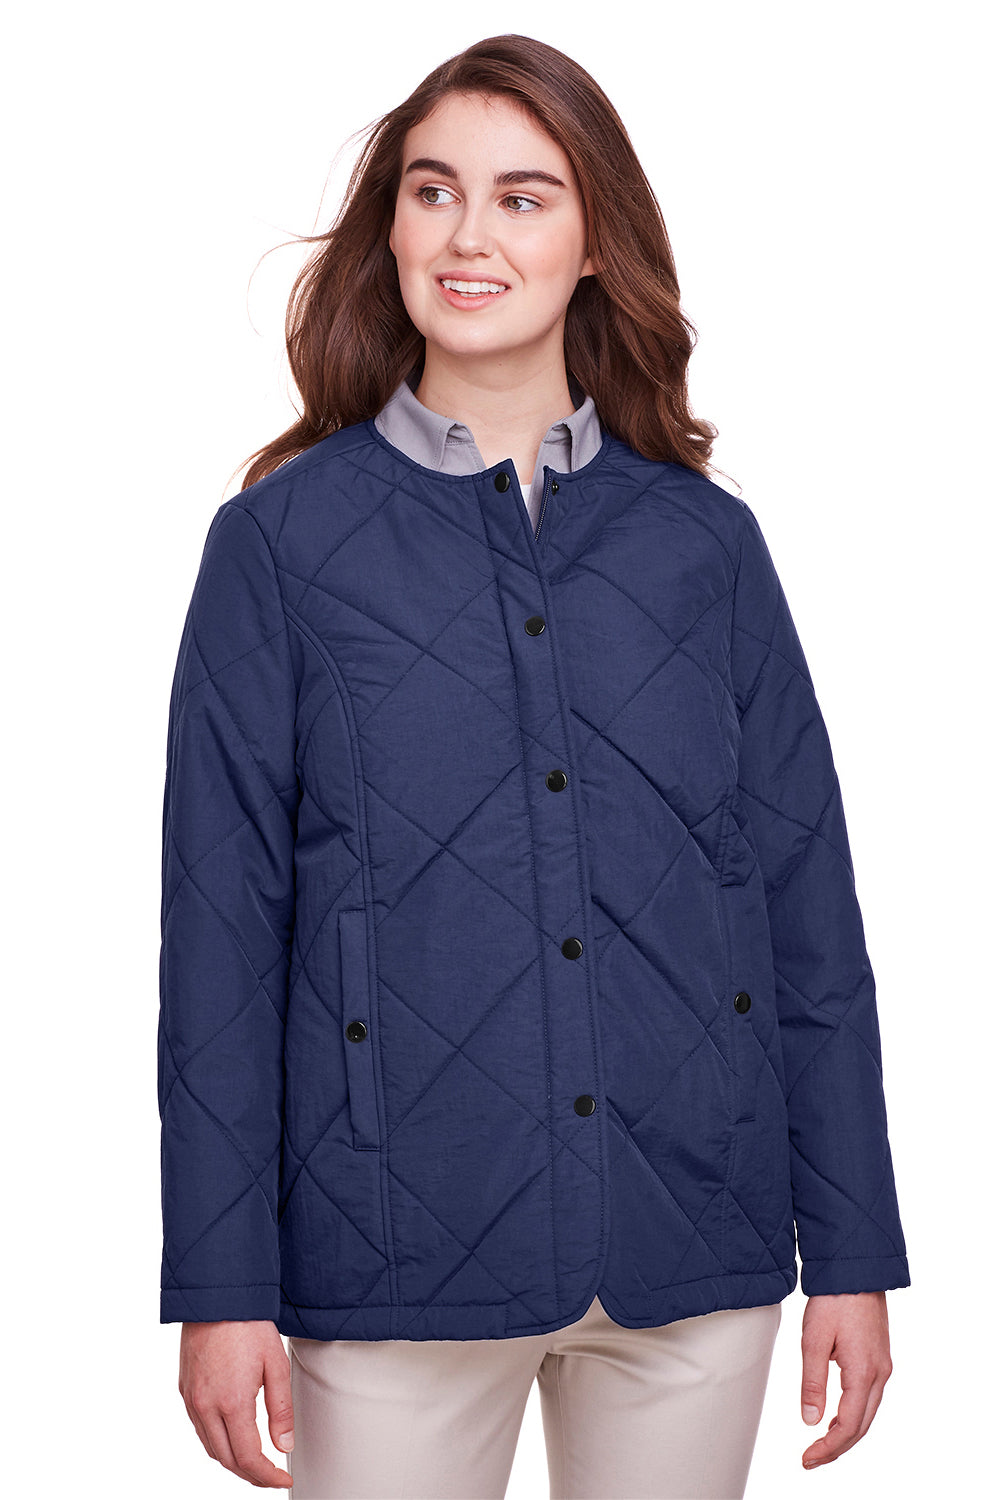 UltraClub UC708W Womens Dawson Quilted Full Zip Jacket Navy Blue Front